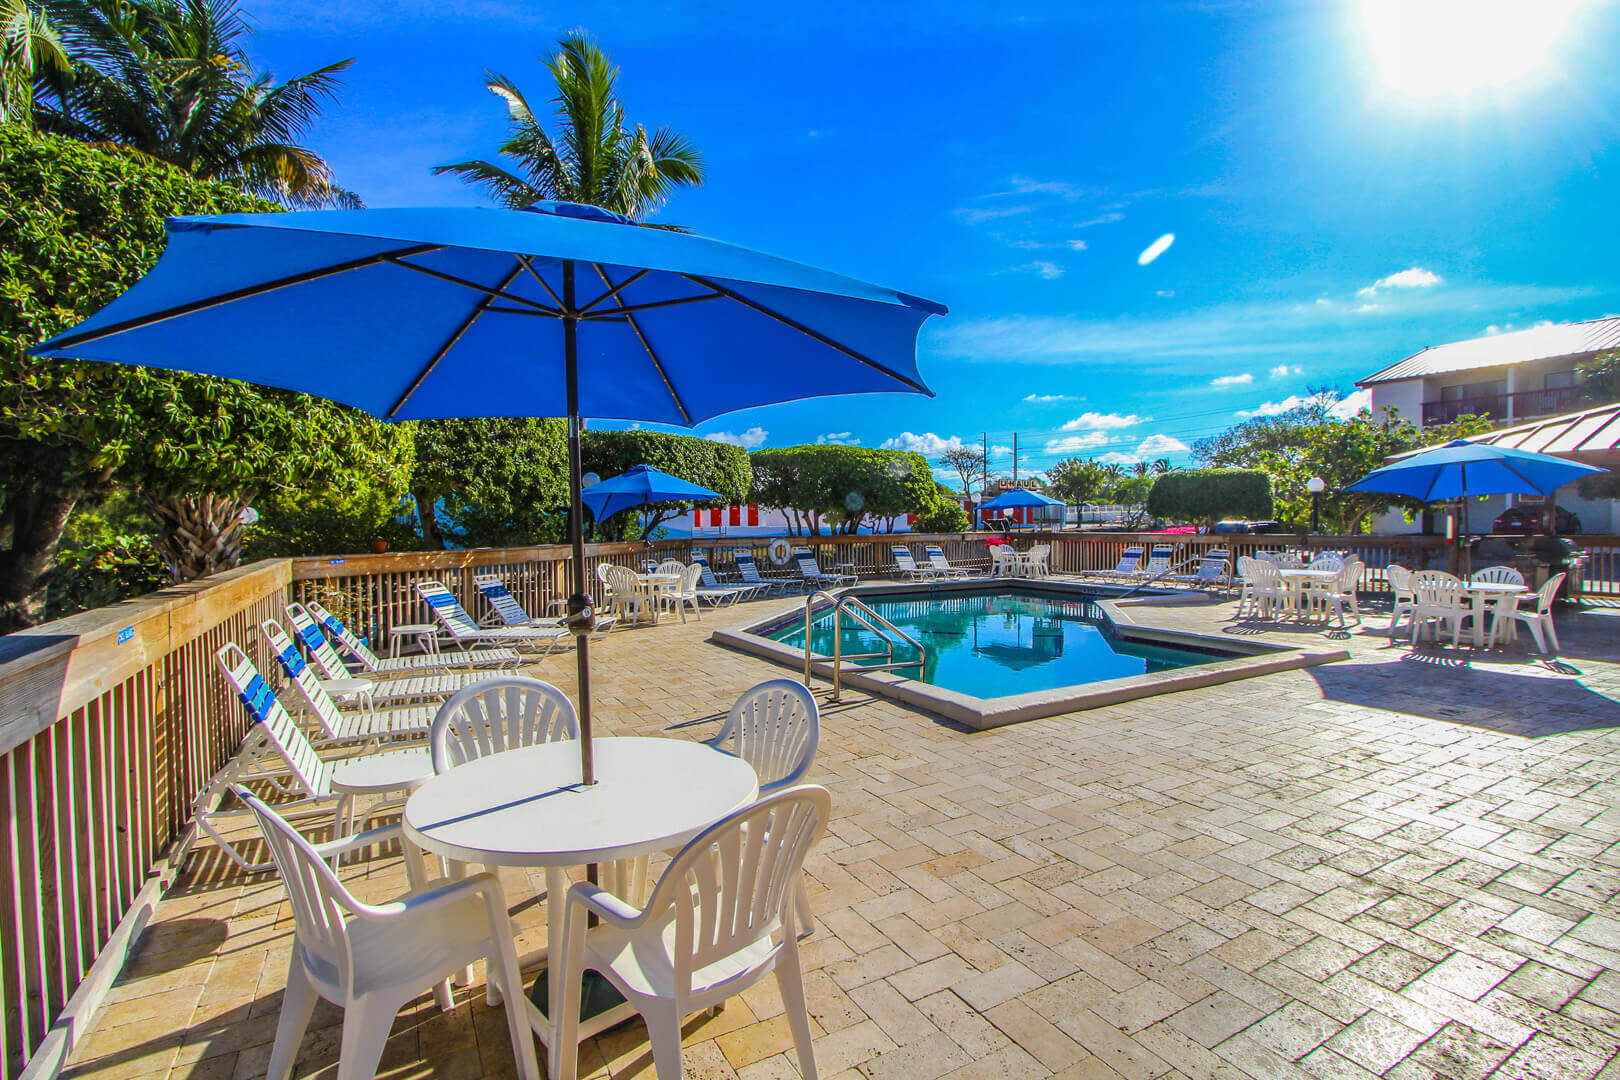 A refreshing pool with lounging area VRI's Florida Bay Club in Florida.